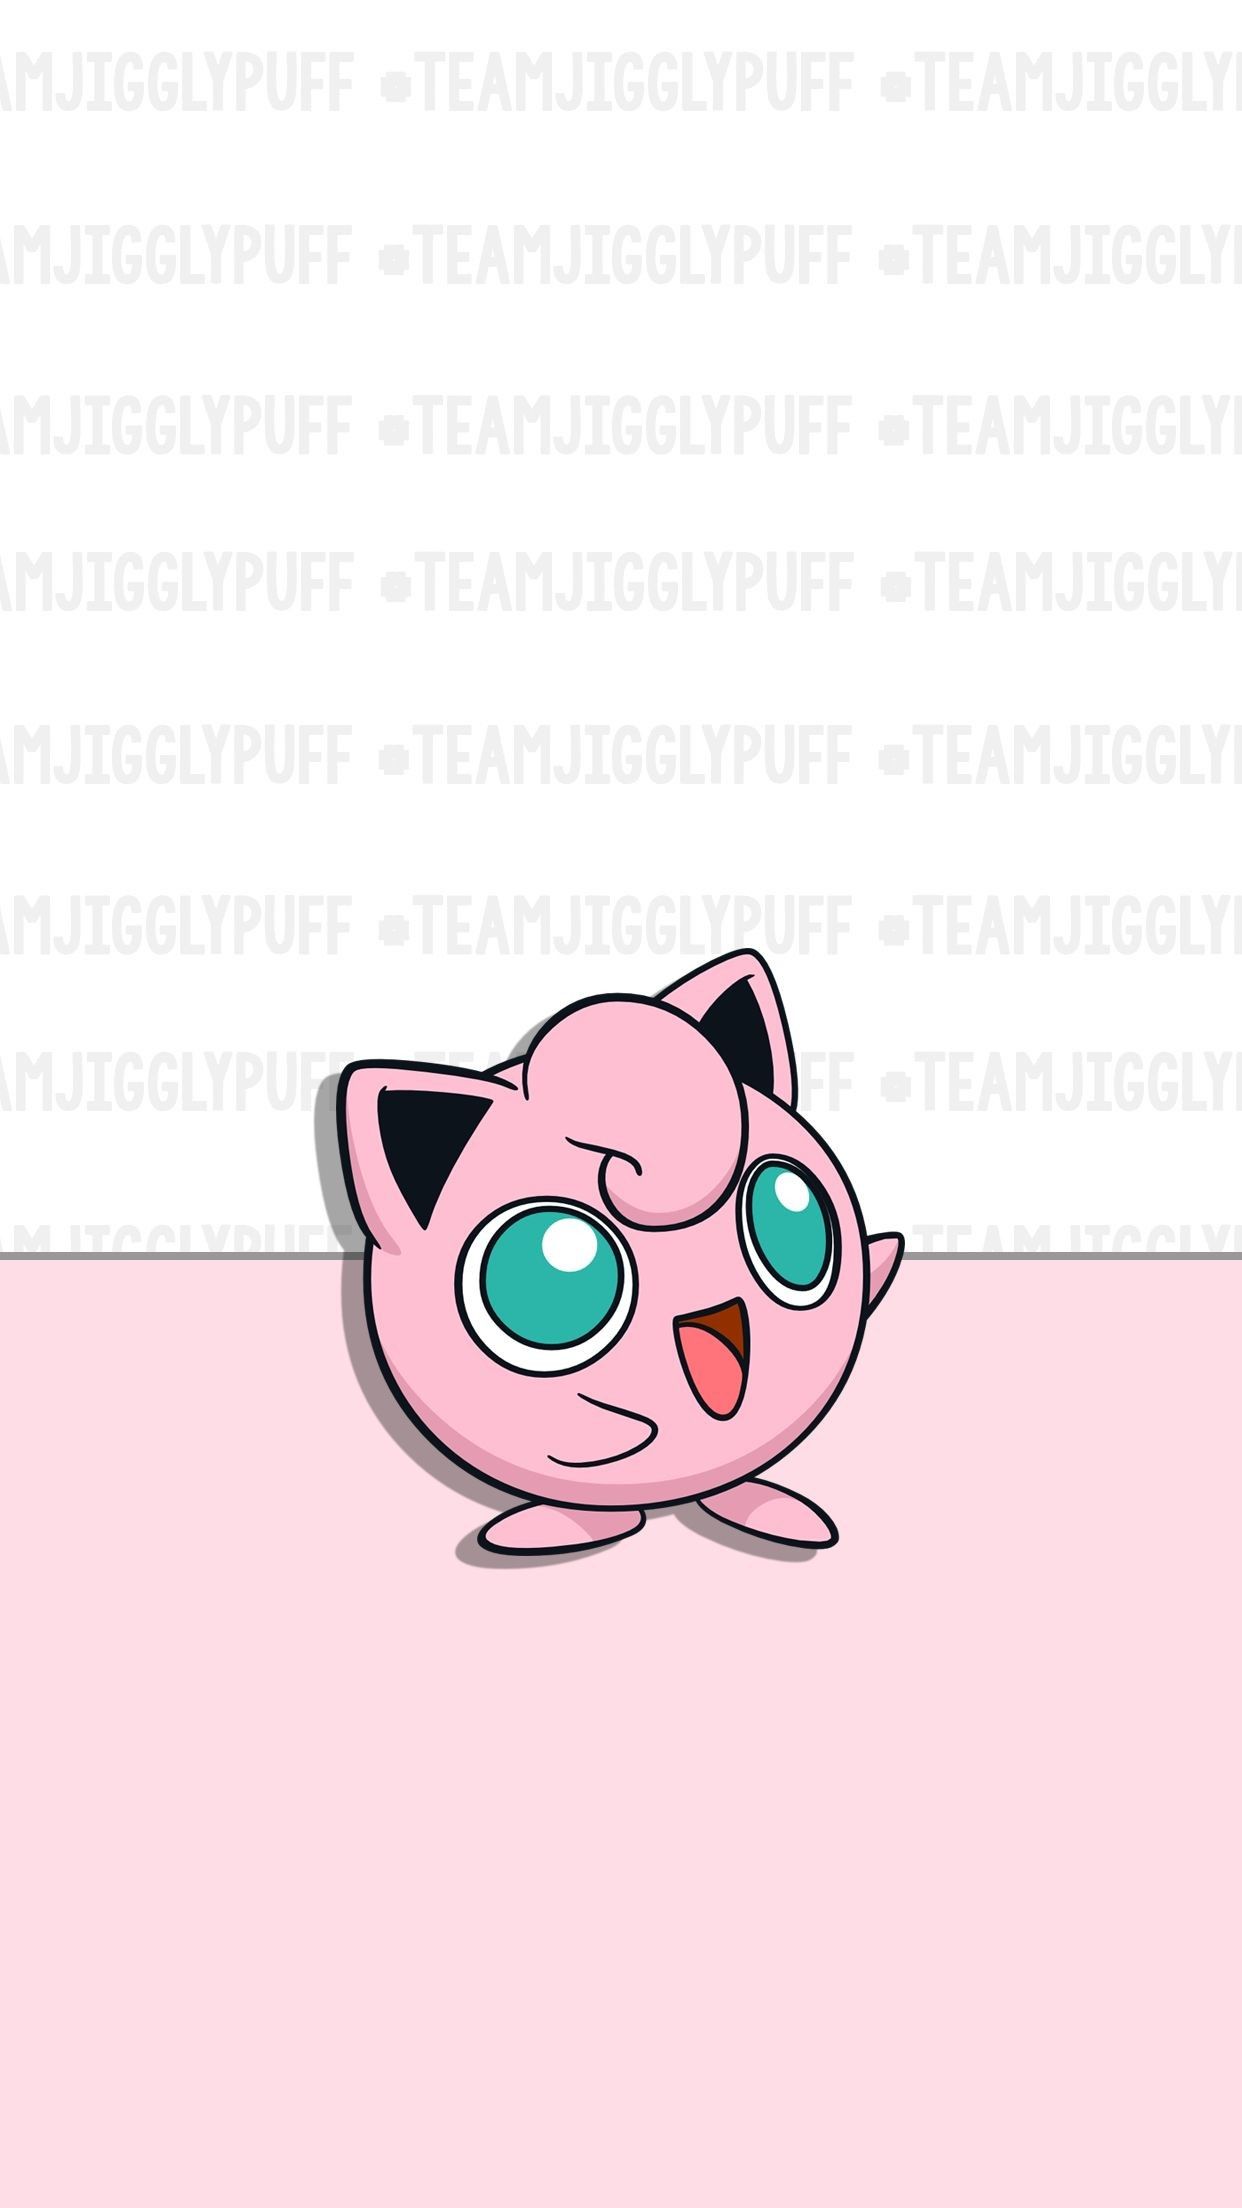 Jigglypuff Wallpaper background picture